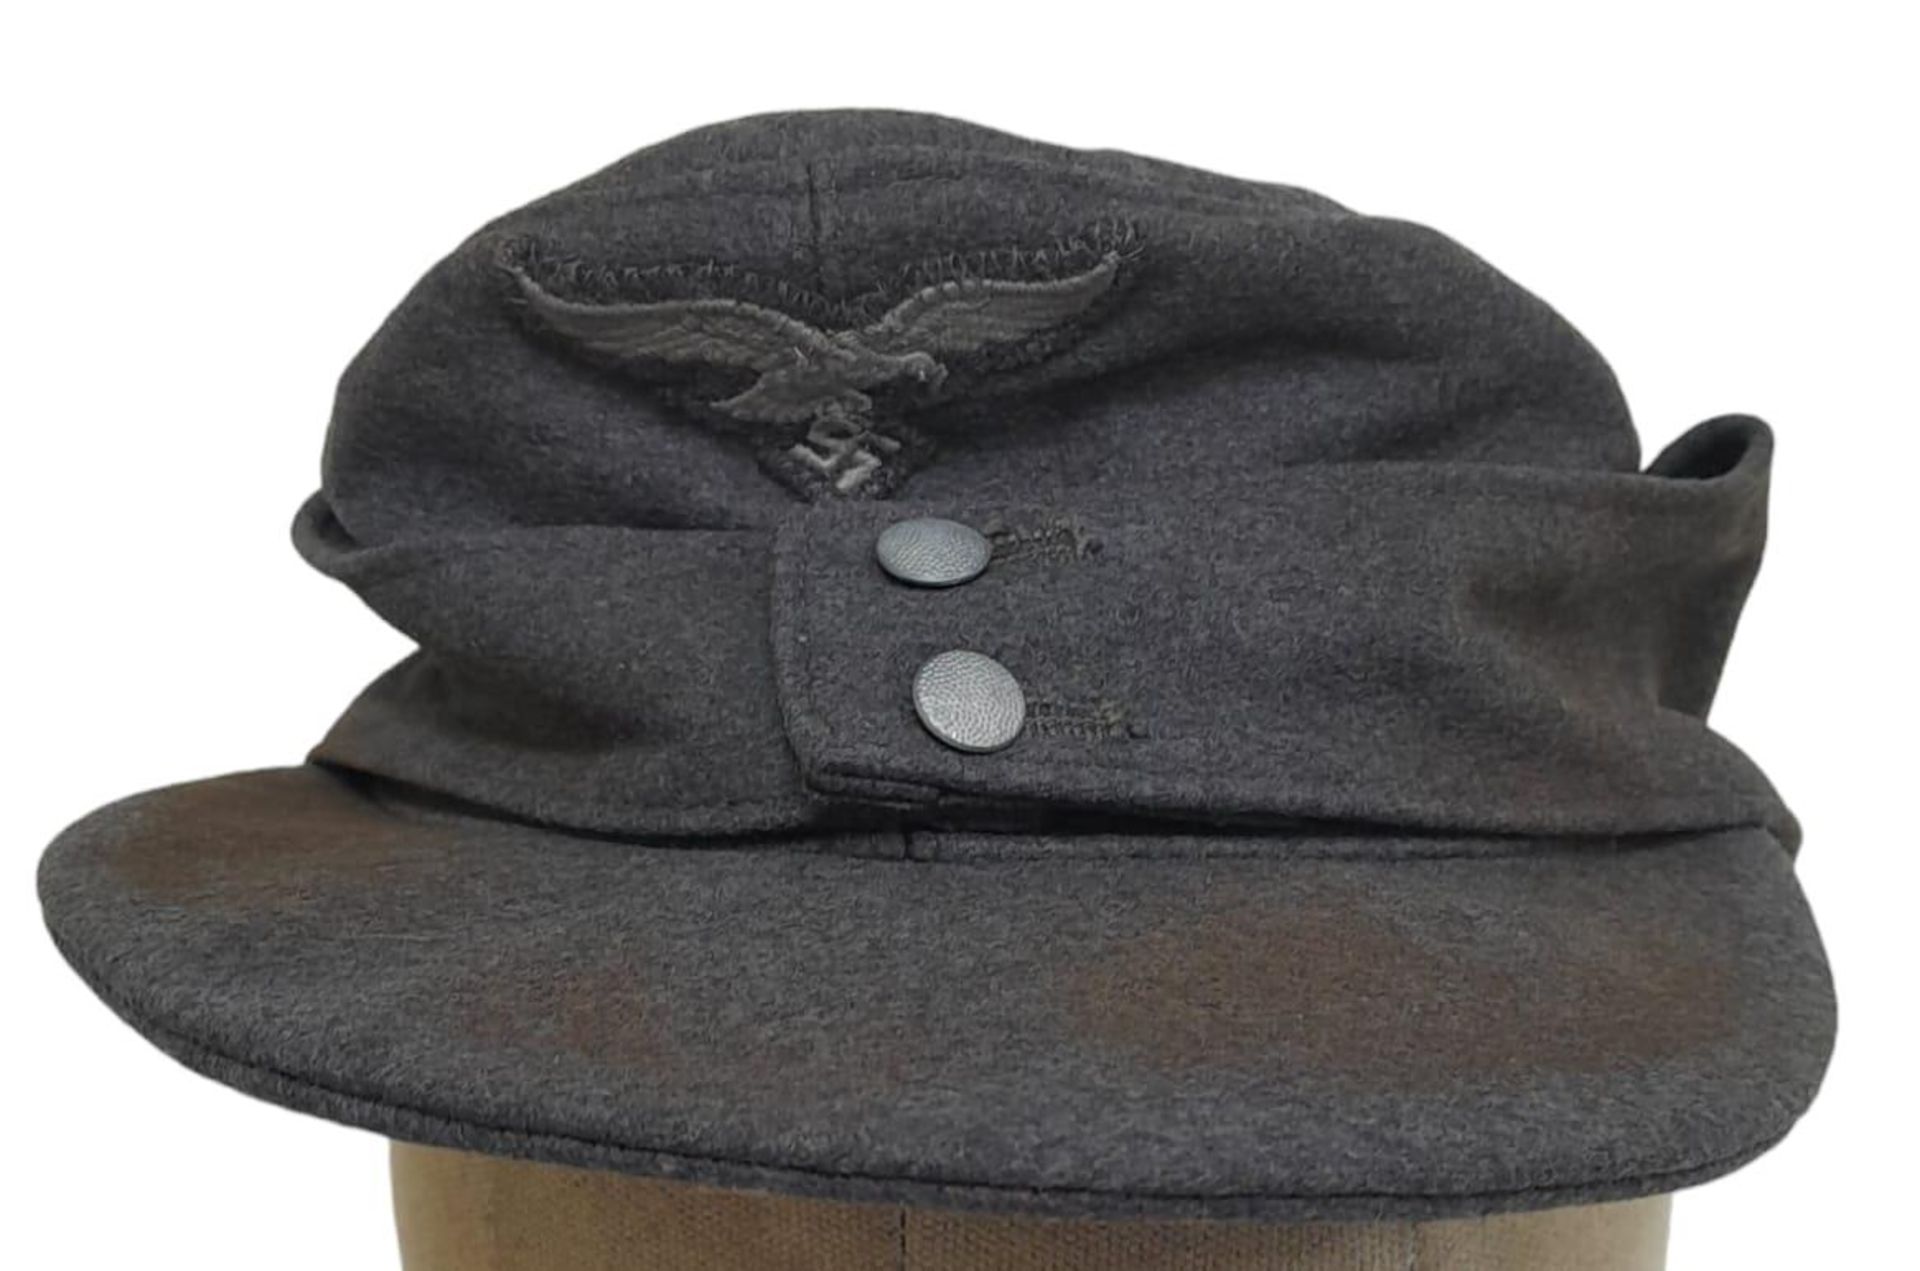 WW2 German Luftwaffe Enlisted Mans/Nco’s Private Purchase M43 Cap.